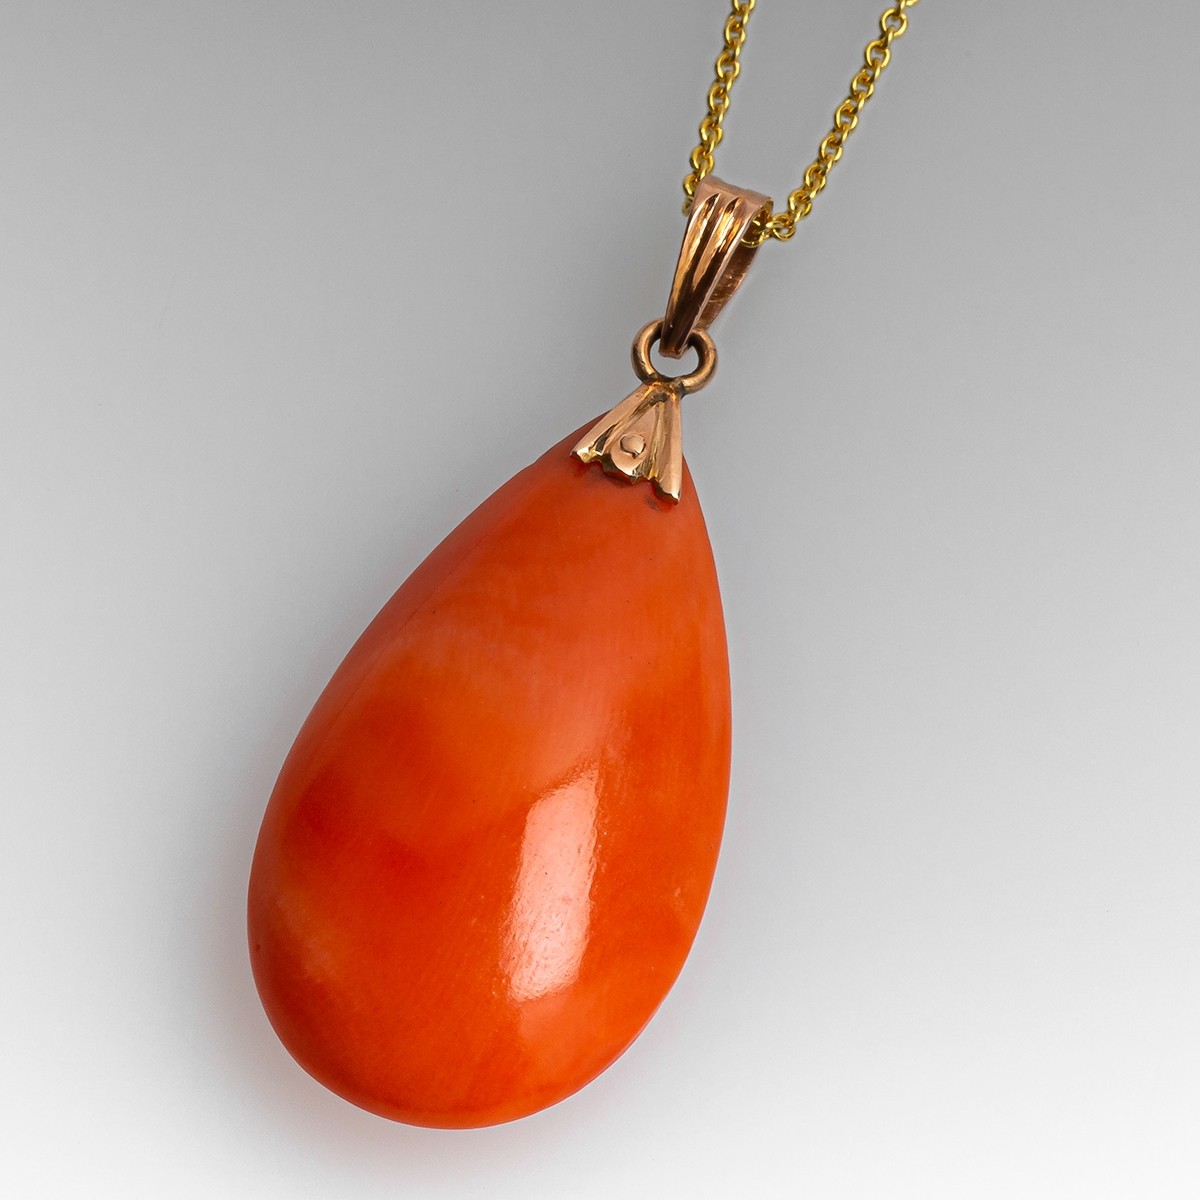 Beauniq 14k Yellow or White Gold 5 Millimeter Simulated Light Red Coral Pendant Necklace 